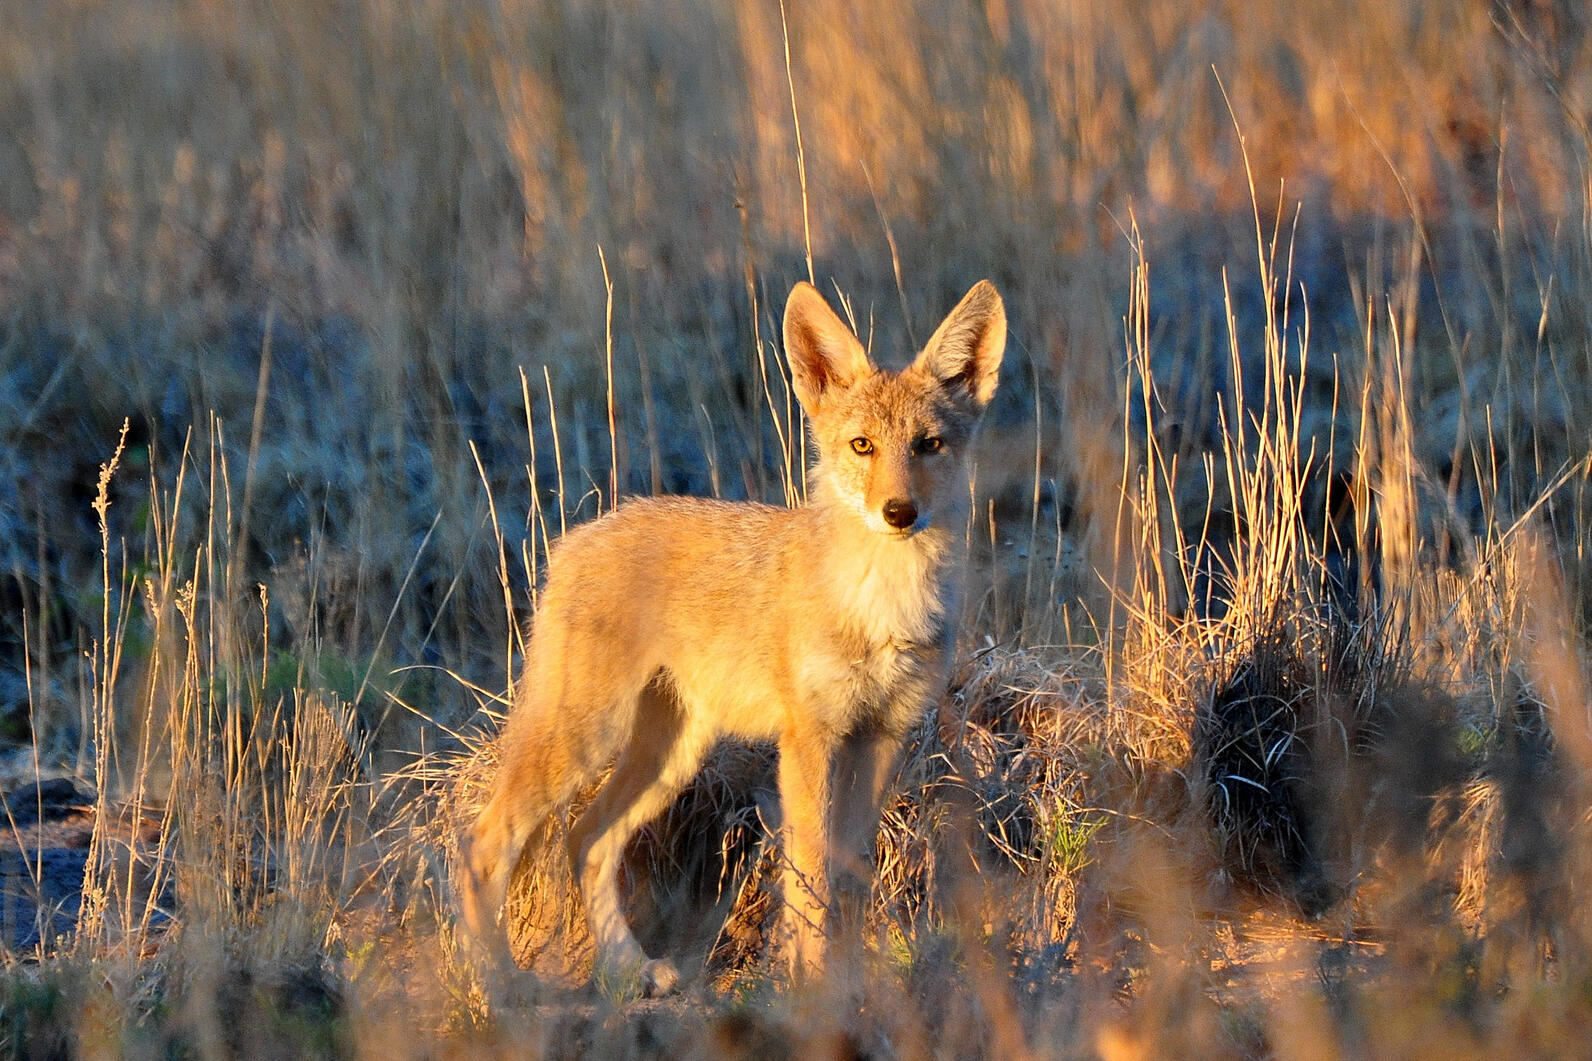 Coyote pup at sunset.